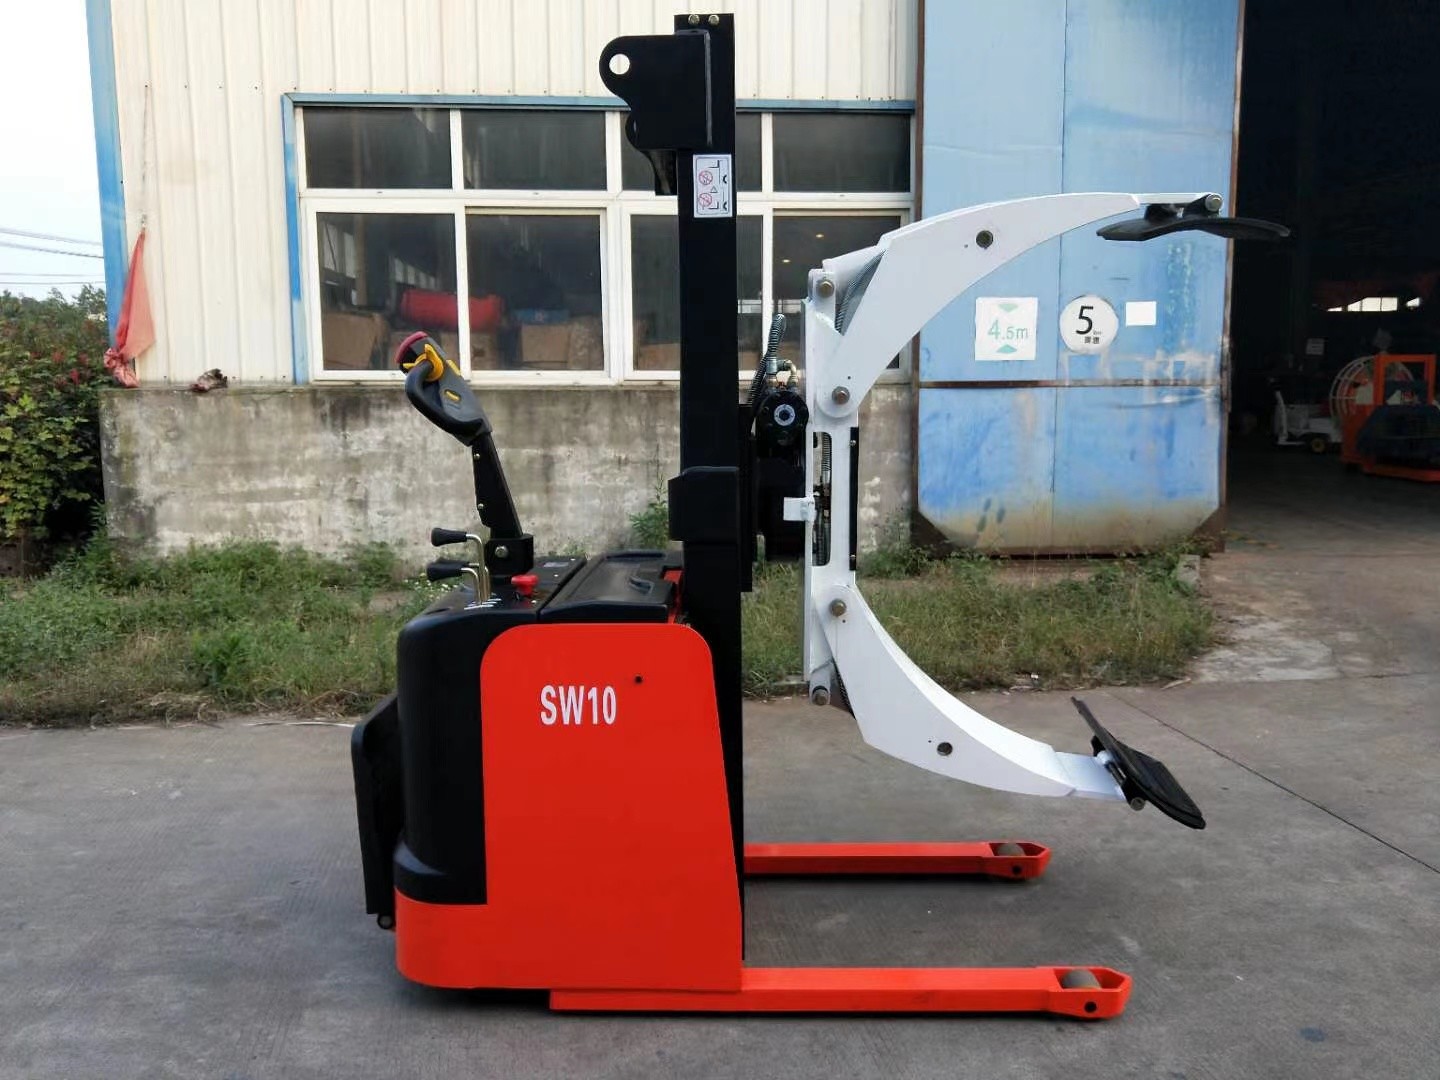 1.5 Ton Load Capacity Electric Clamp Stacker 400-1300 Mm With Straddle Legs